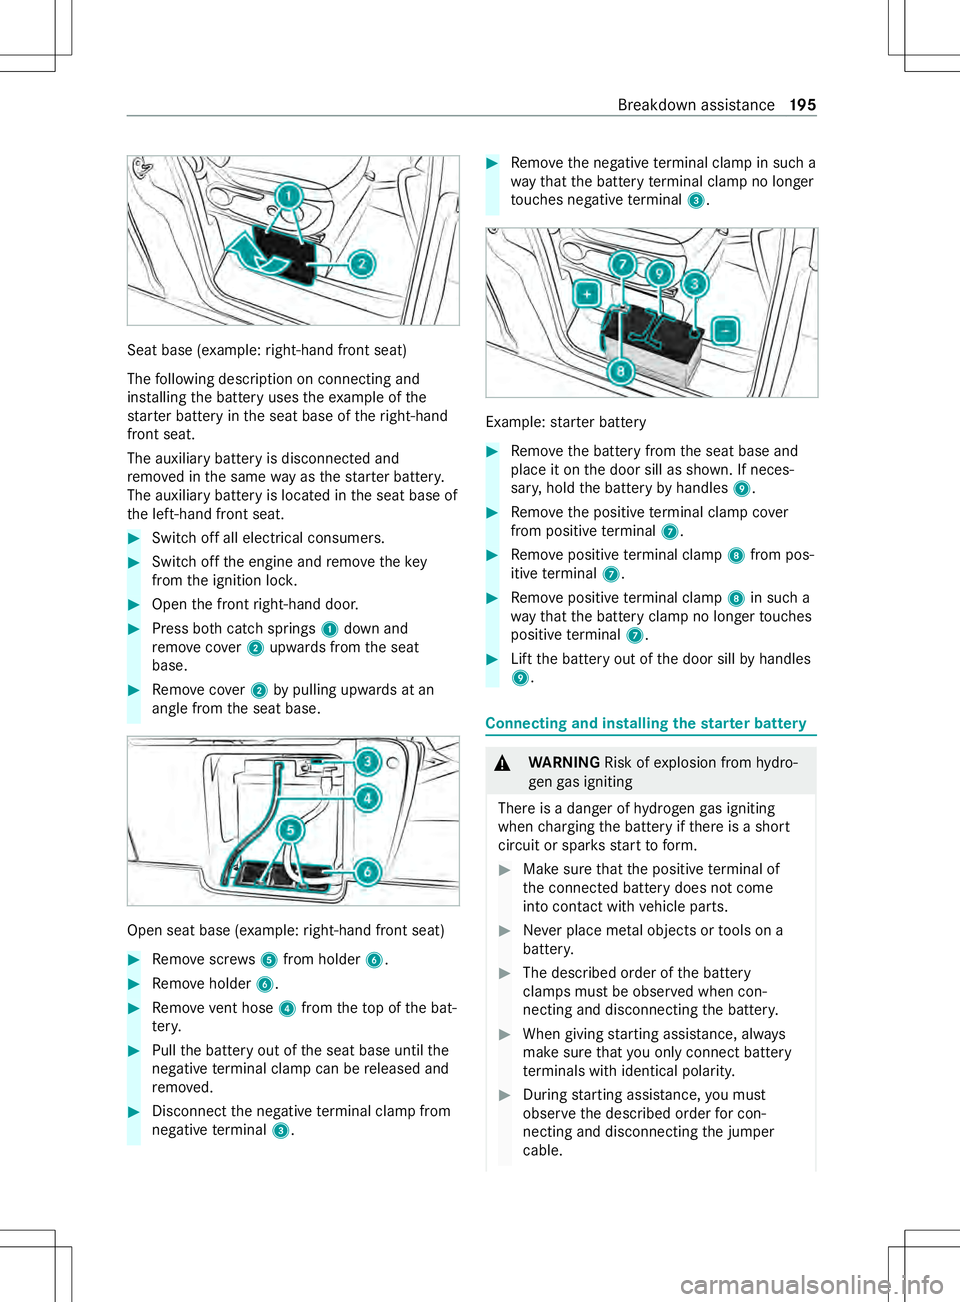 MERCEDES-BENZ METRIS 2021  MY21 Operators Manual Sea
tbase( example: right-han dfront seat)
The following description on connectin gand
ins talling theb atter yuses thee xamp le ofthe
st ar terb atter yint he seat base of ther ight-ha nd
front seat.